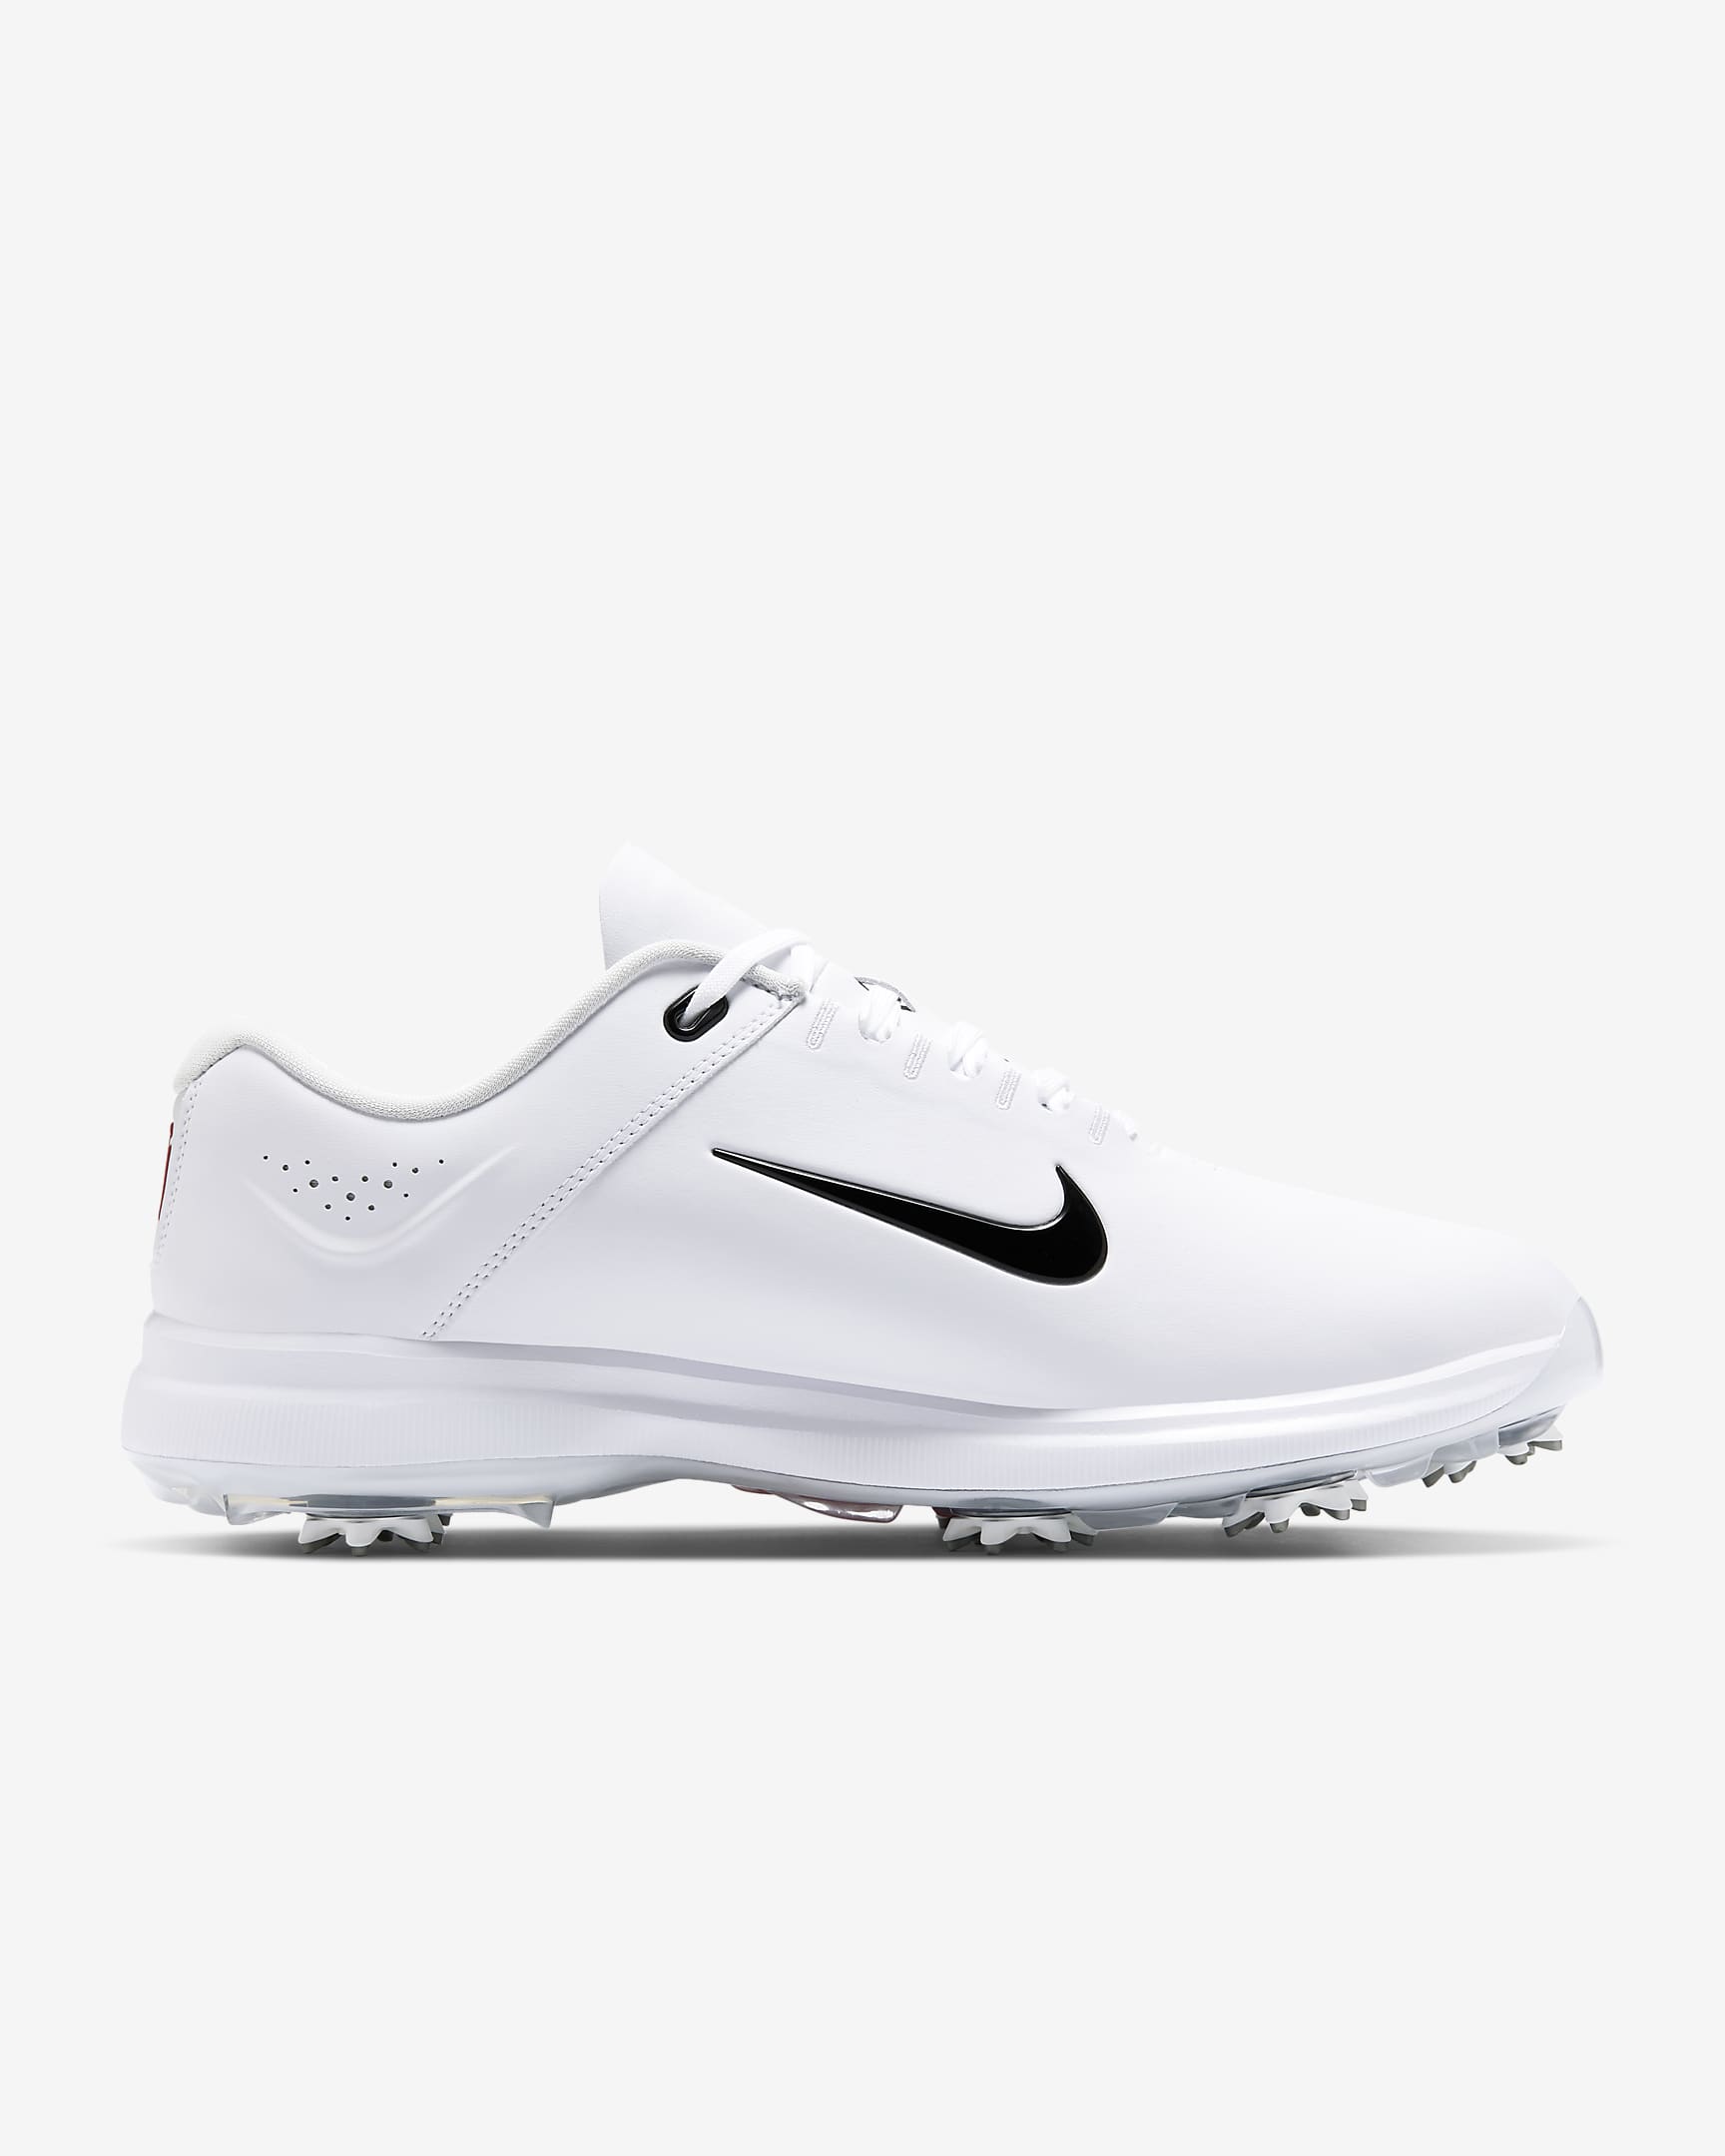 Tiger Woods '20 Men's Golf Shoes (Wide). Nike MY